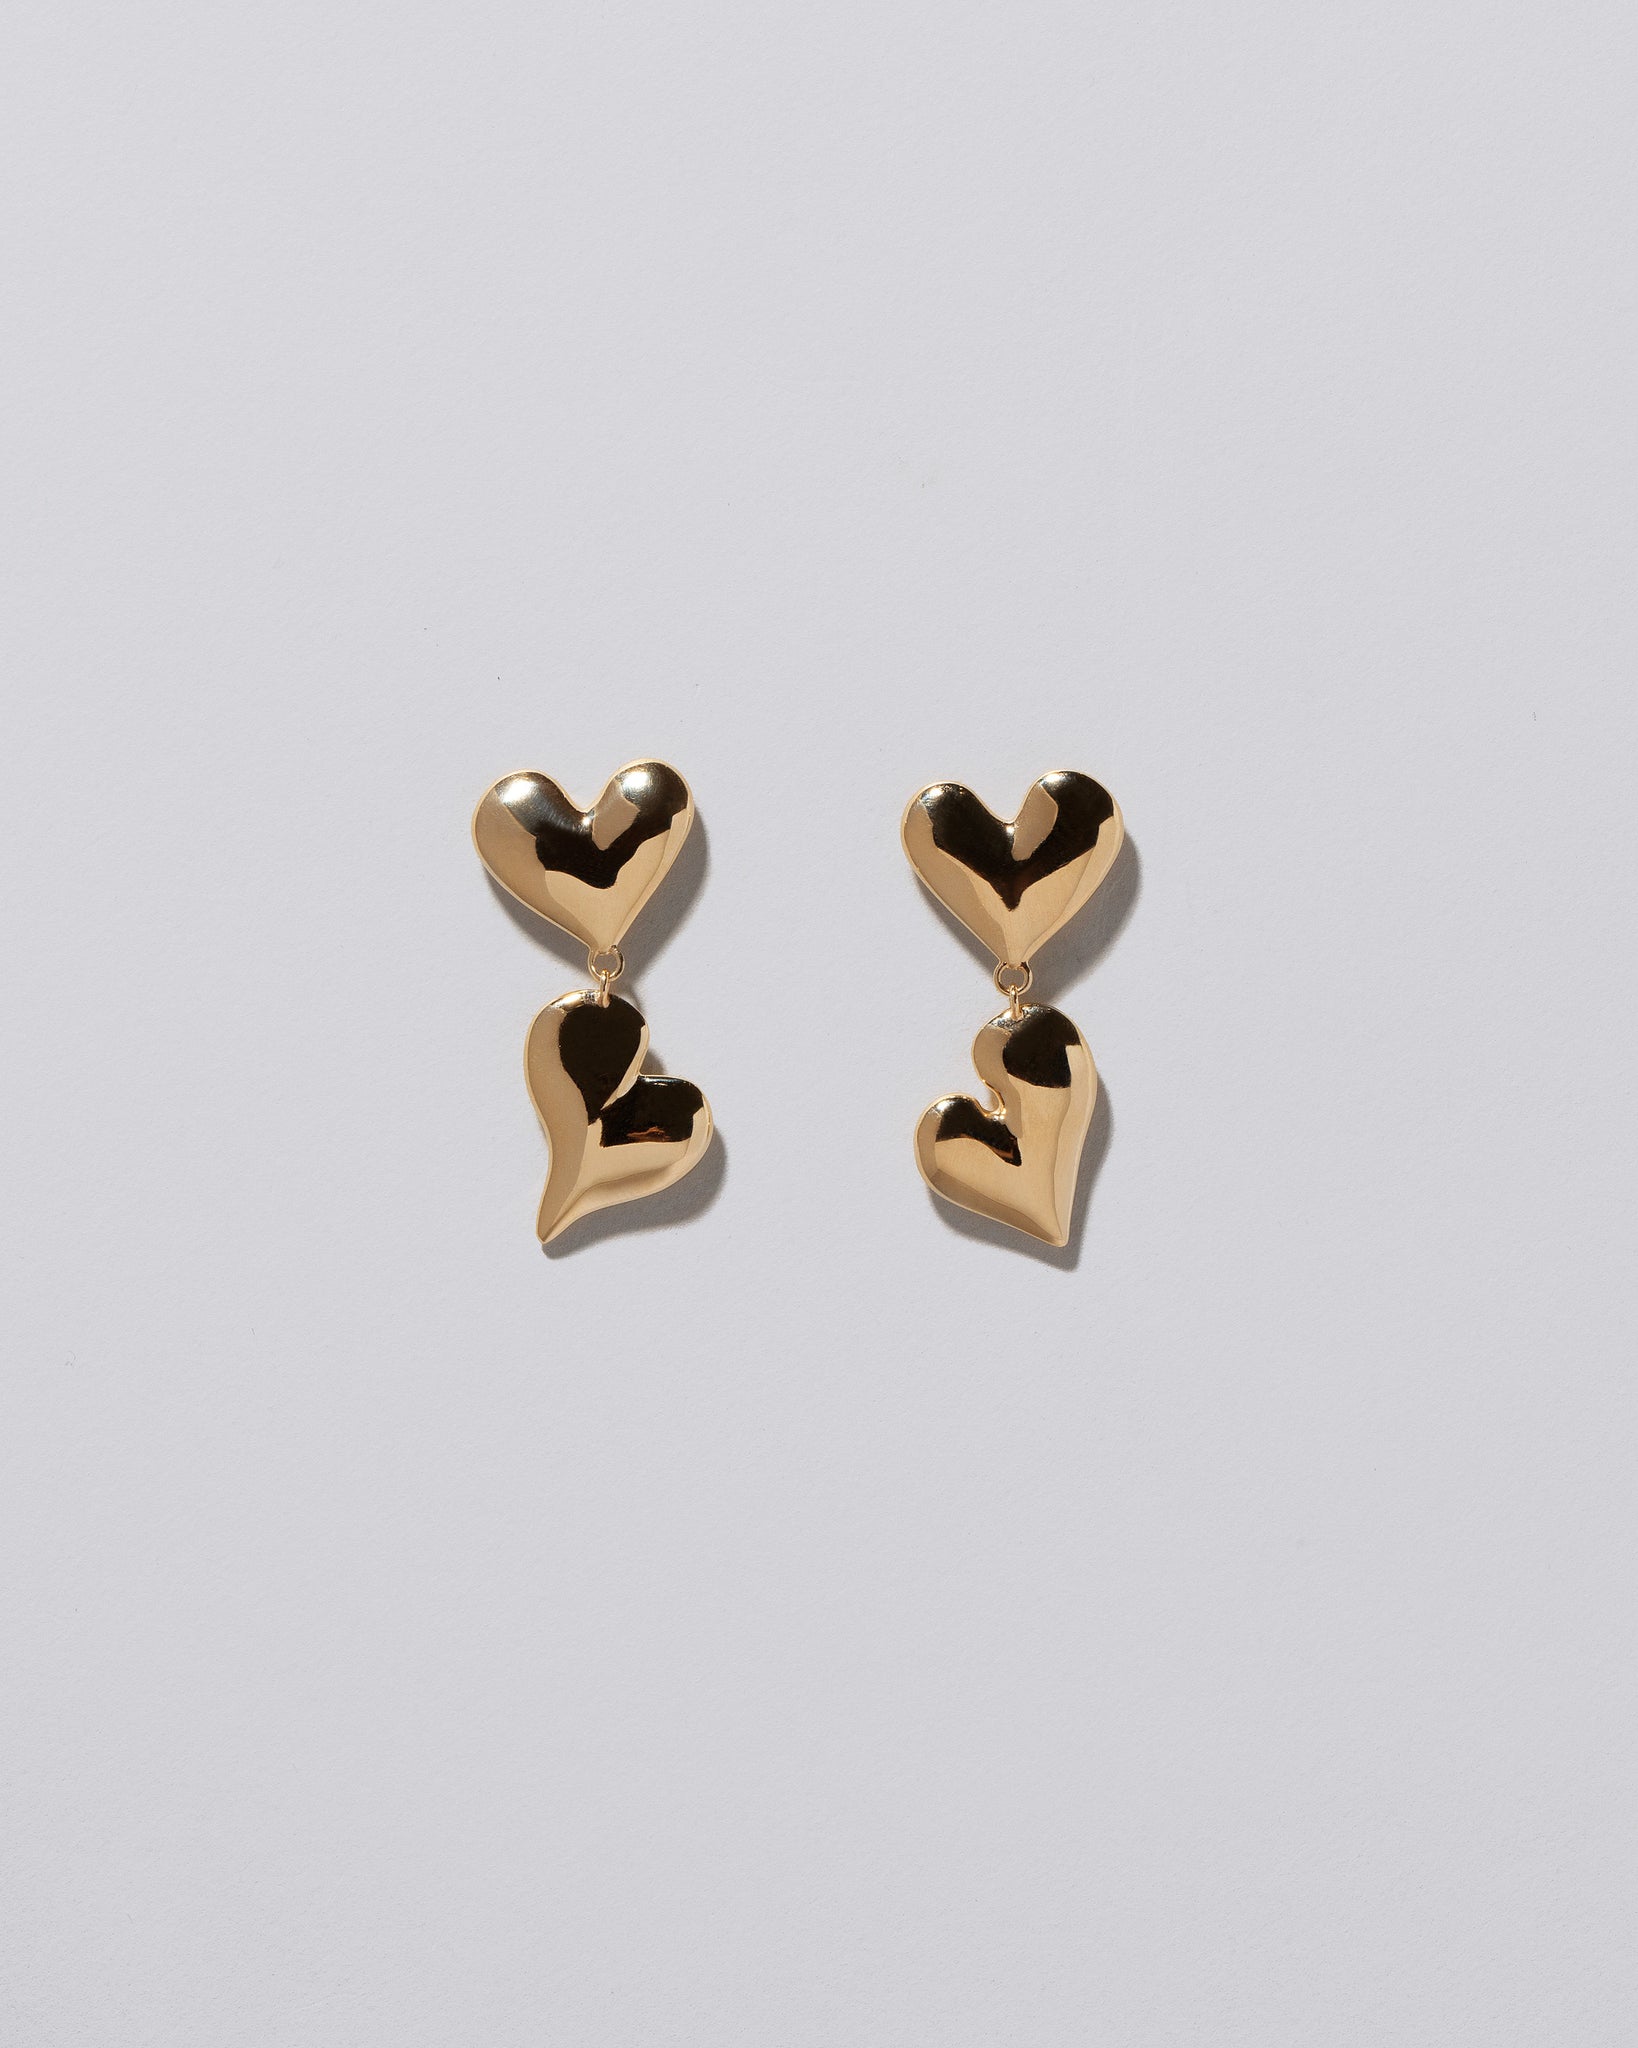 Thousand & One Night Heart Drop Earrings on light color background.